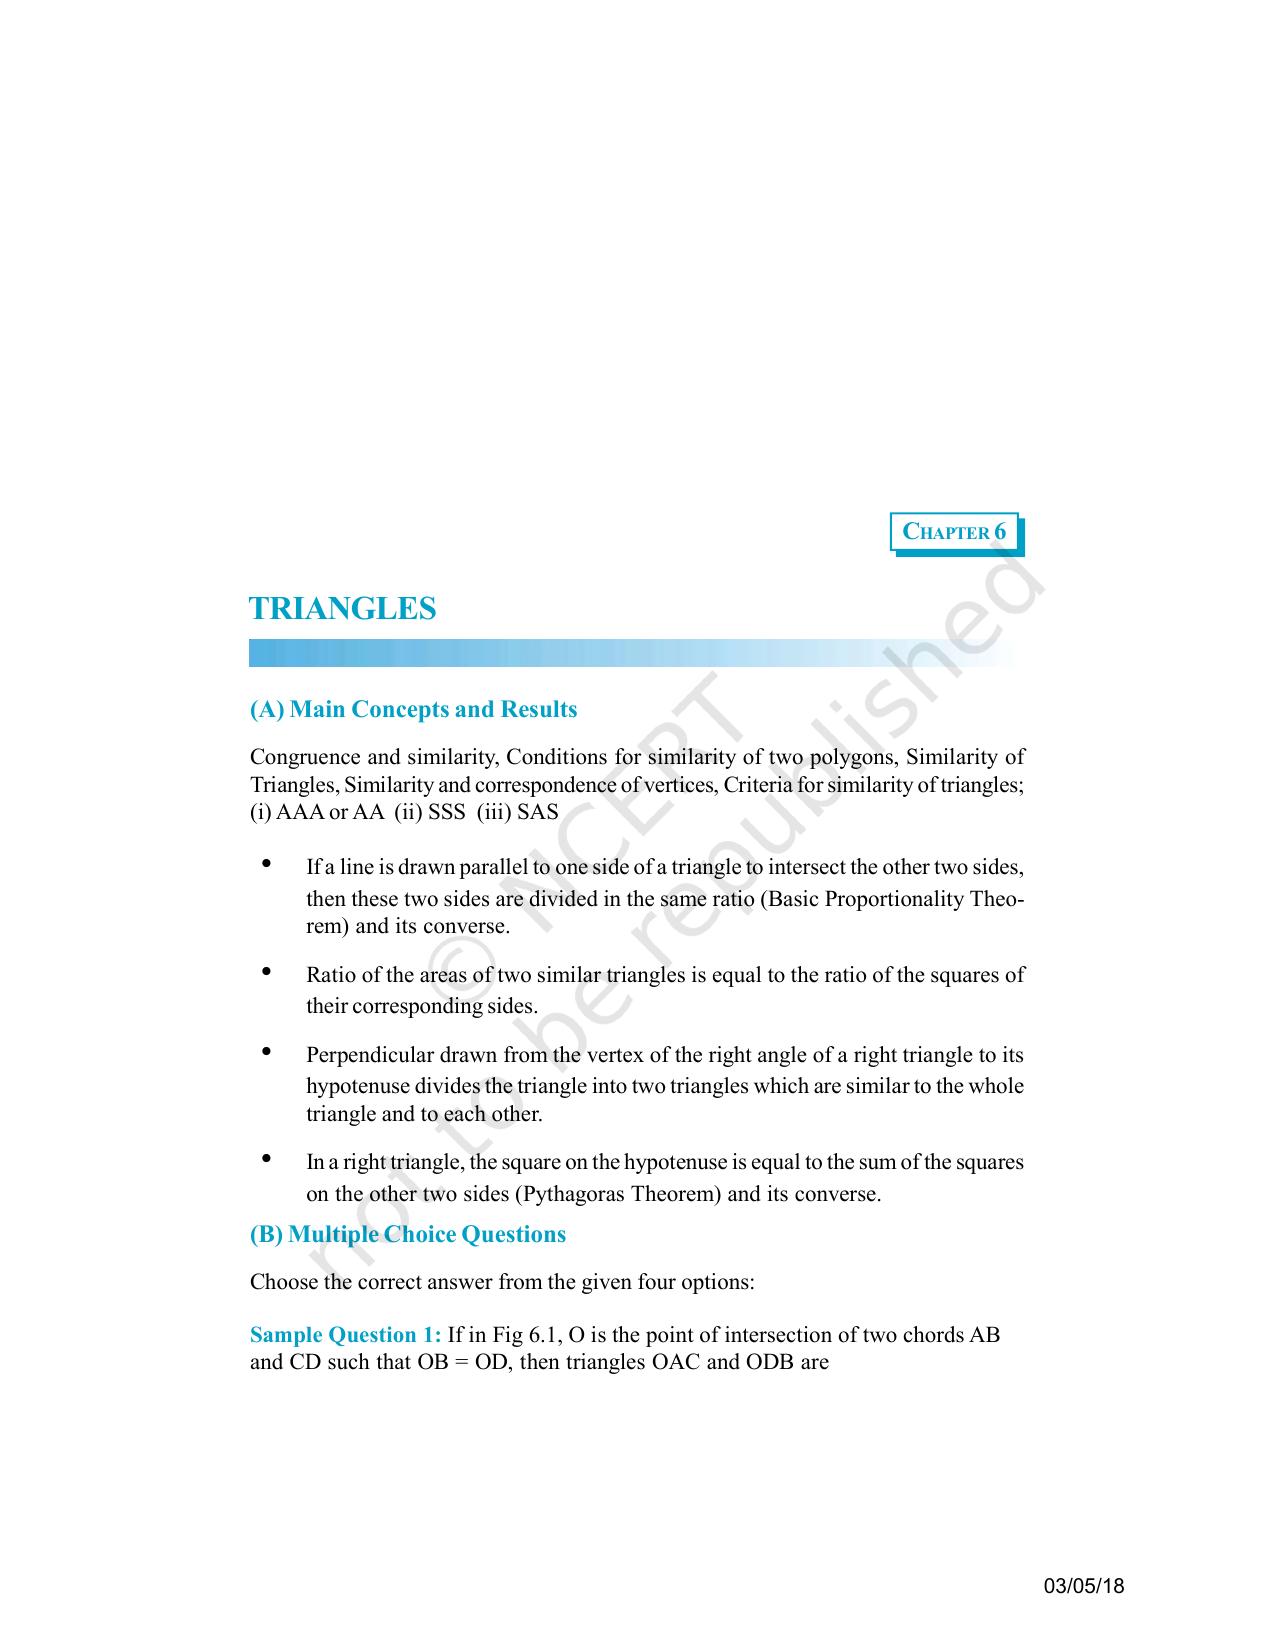 NCERT Exemplar Book for Class 10 Maths: Chapter 6 Triangles - Page 1